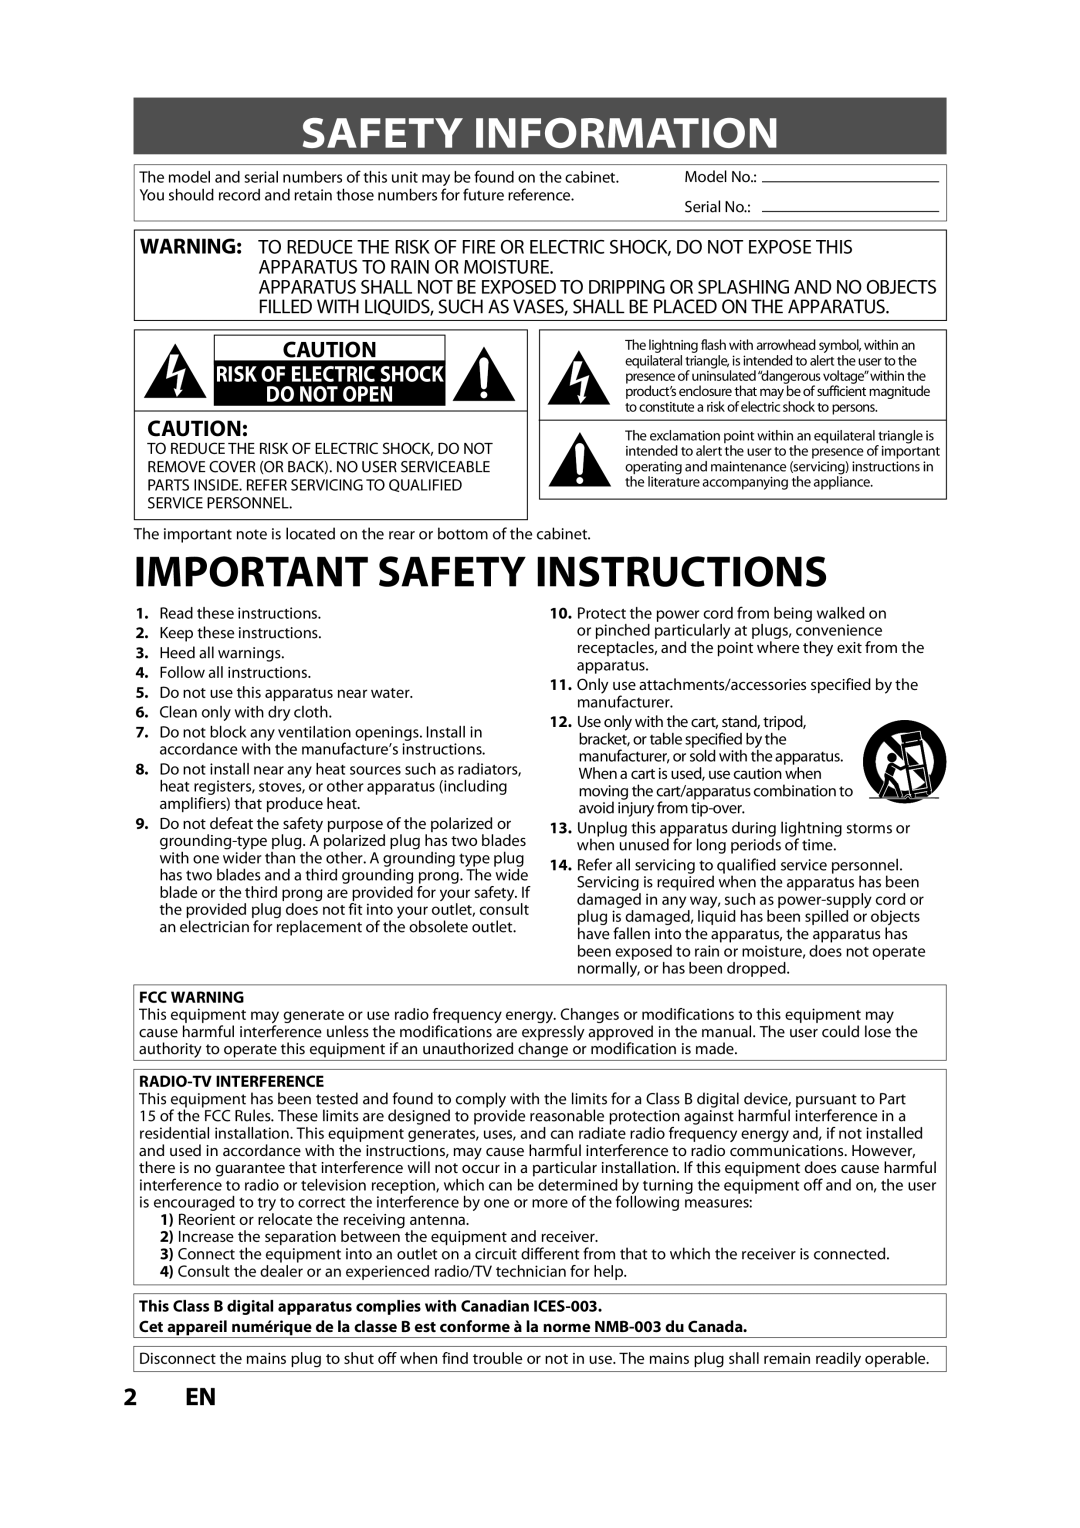 FUNAI ZV457MG9 A Safety Information, 2 EN, Important Safety Instructions, Do Not Open, Risk Of Electric Shock, Fcc Warning 